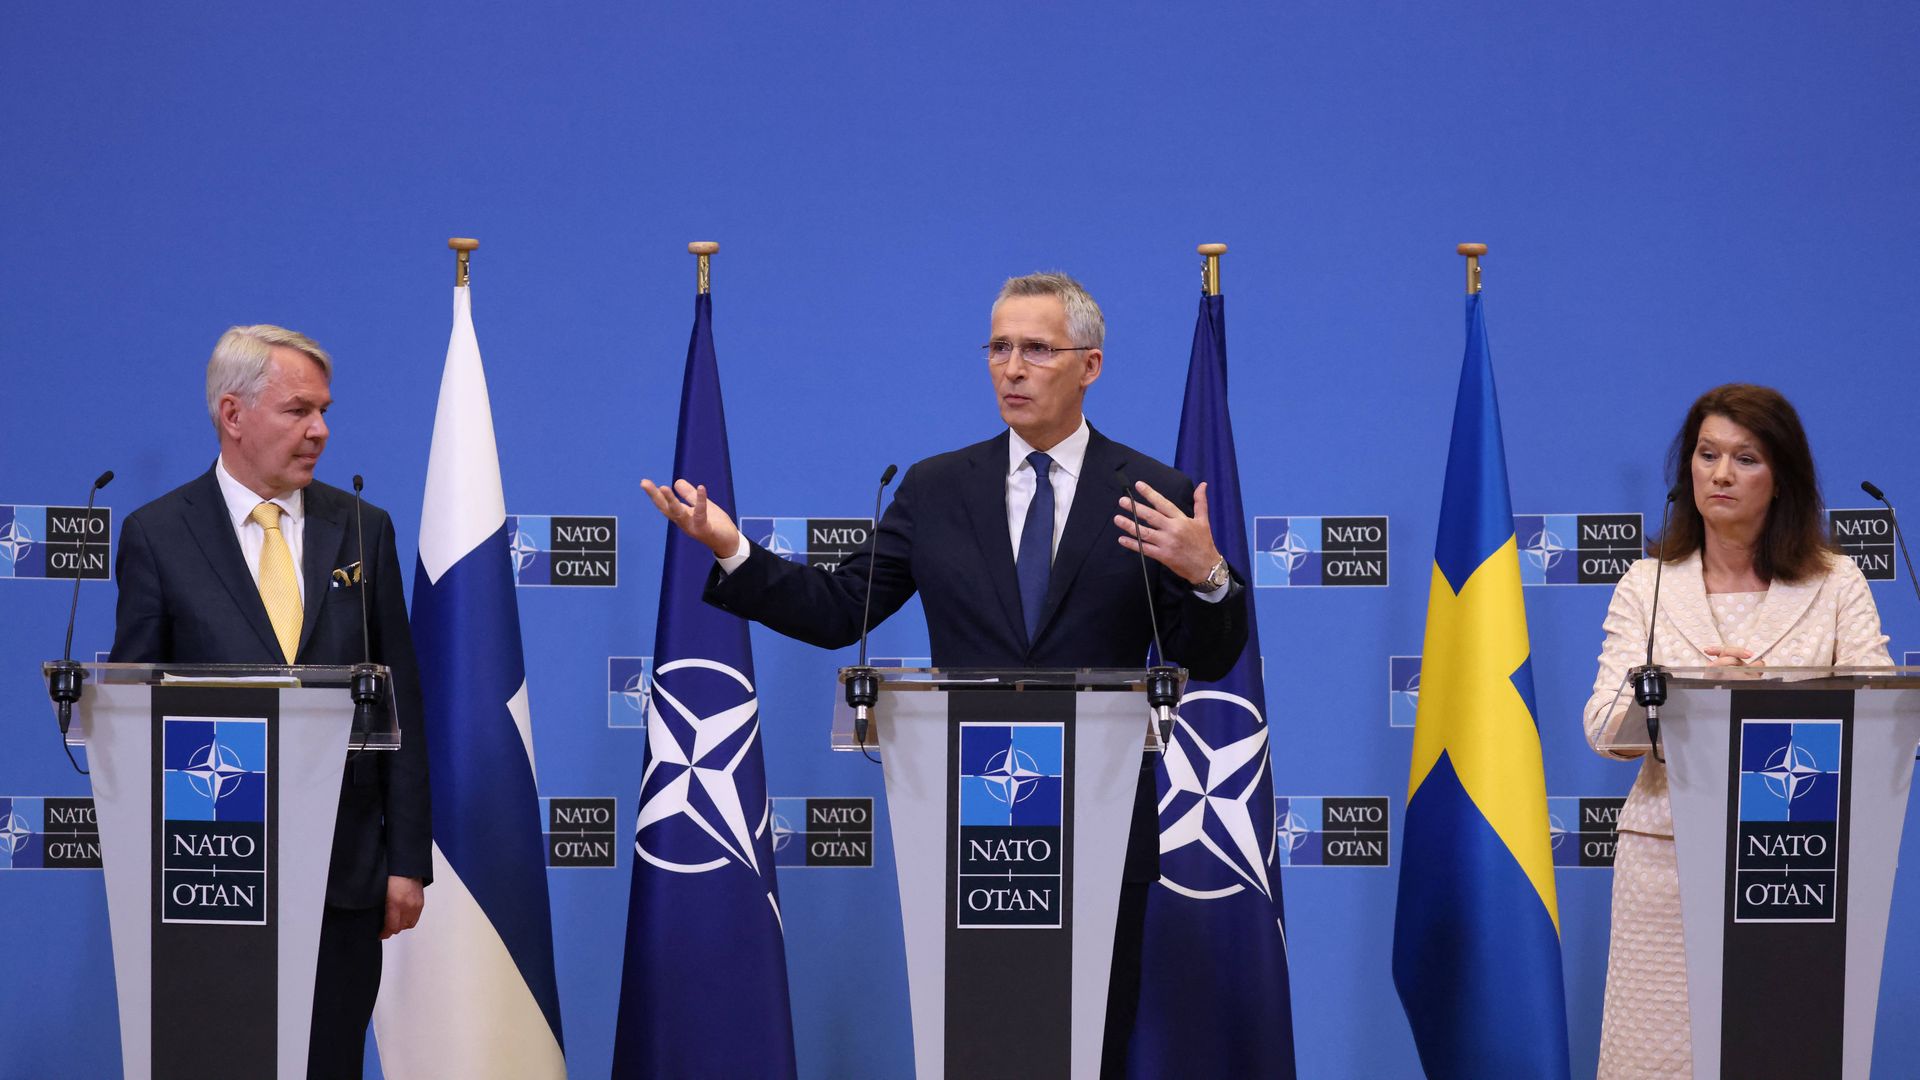 Finnish Foreign Minister Pekka Haavisto, NATO Secretary General Jens Stoltenberg and Swedish Ministry for Foreign Affairs Ann Linde 